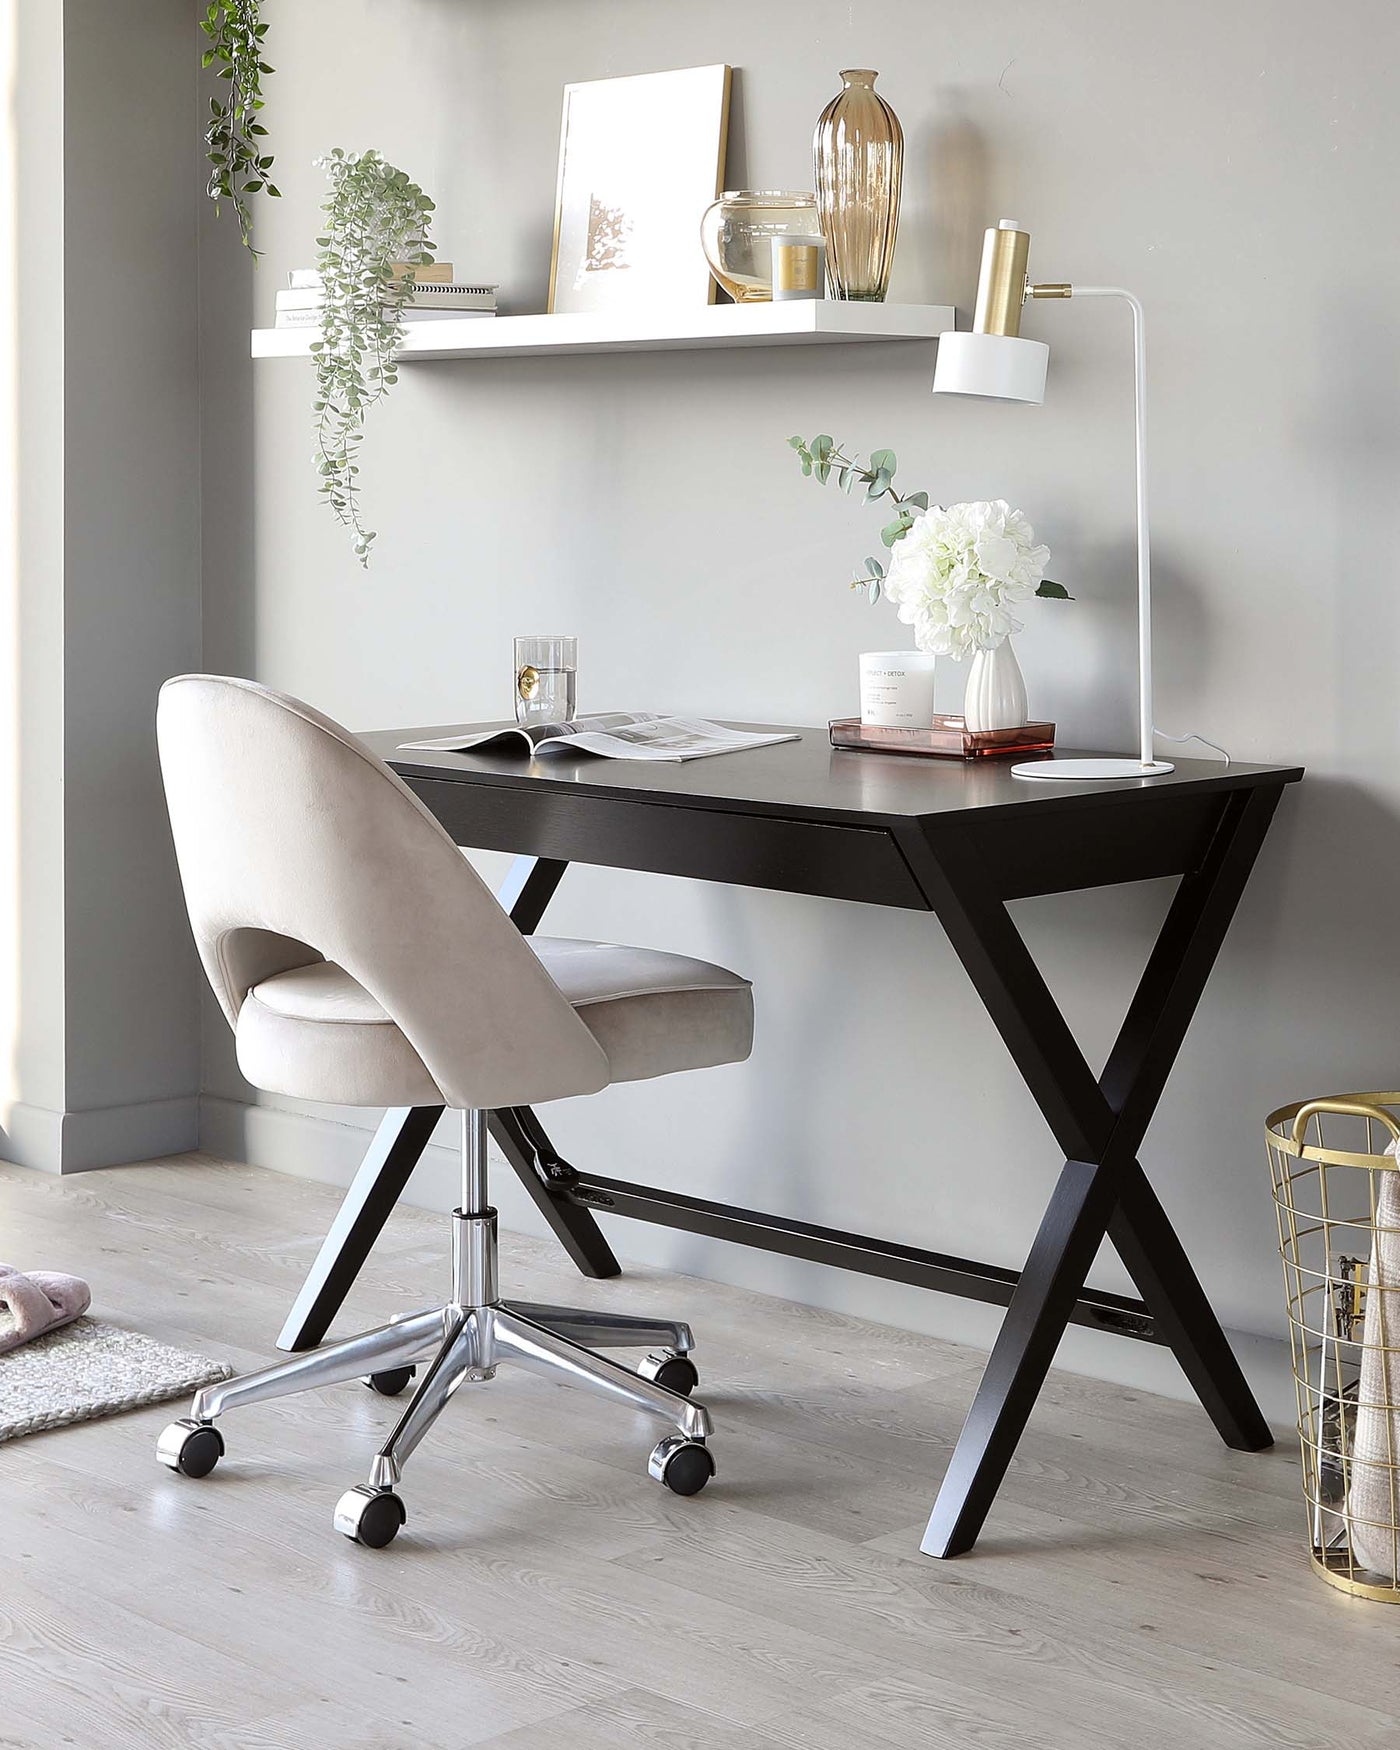 A modern workspace featuring a matte black writing desk with X-shaped legs and a sleek tabletop, paired with a beige upholstered office chair on a chrome swivel base with caster wheels.